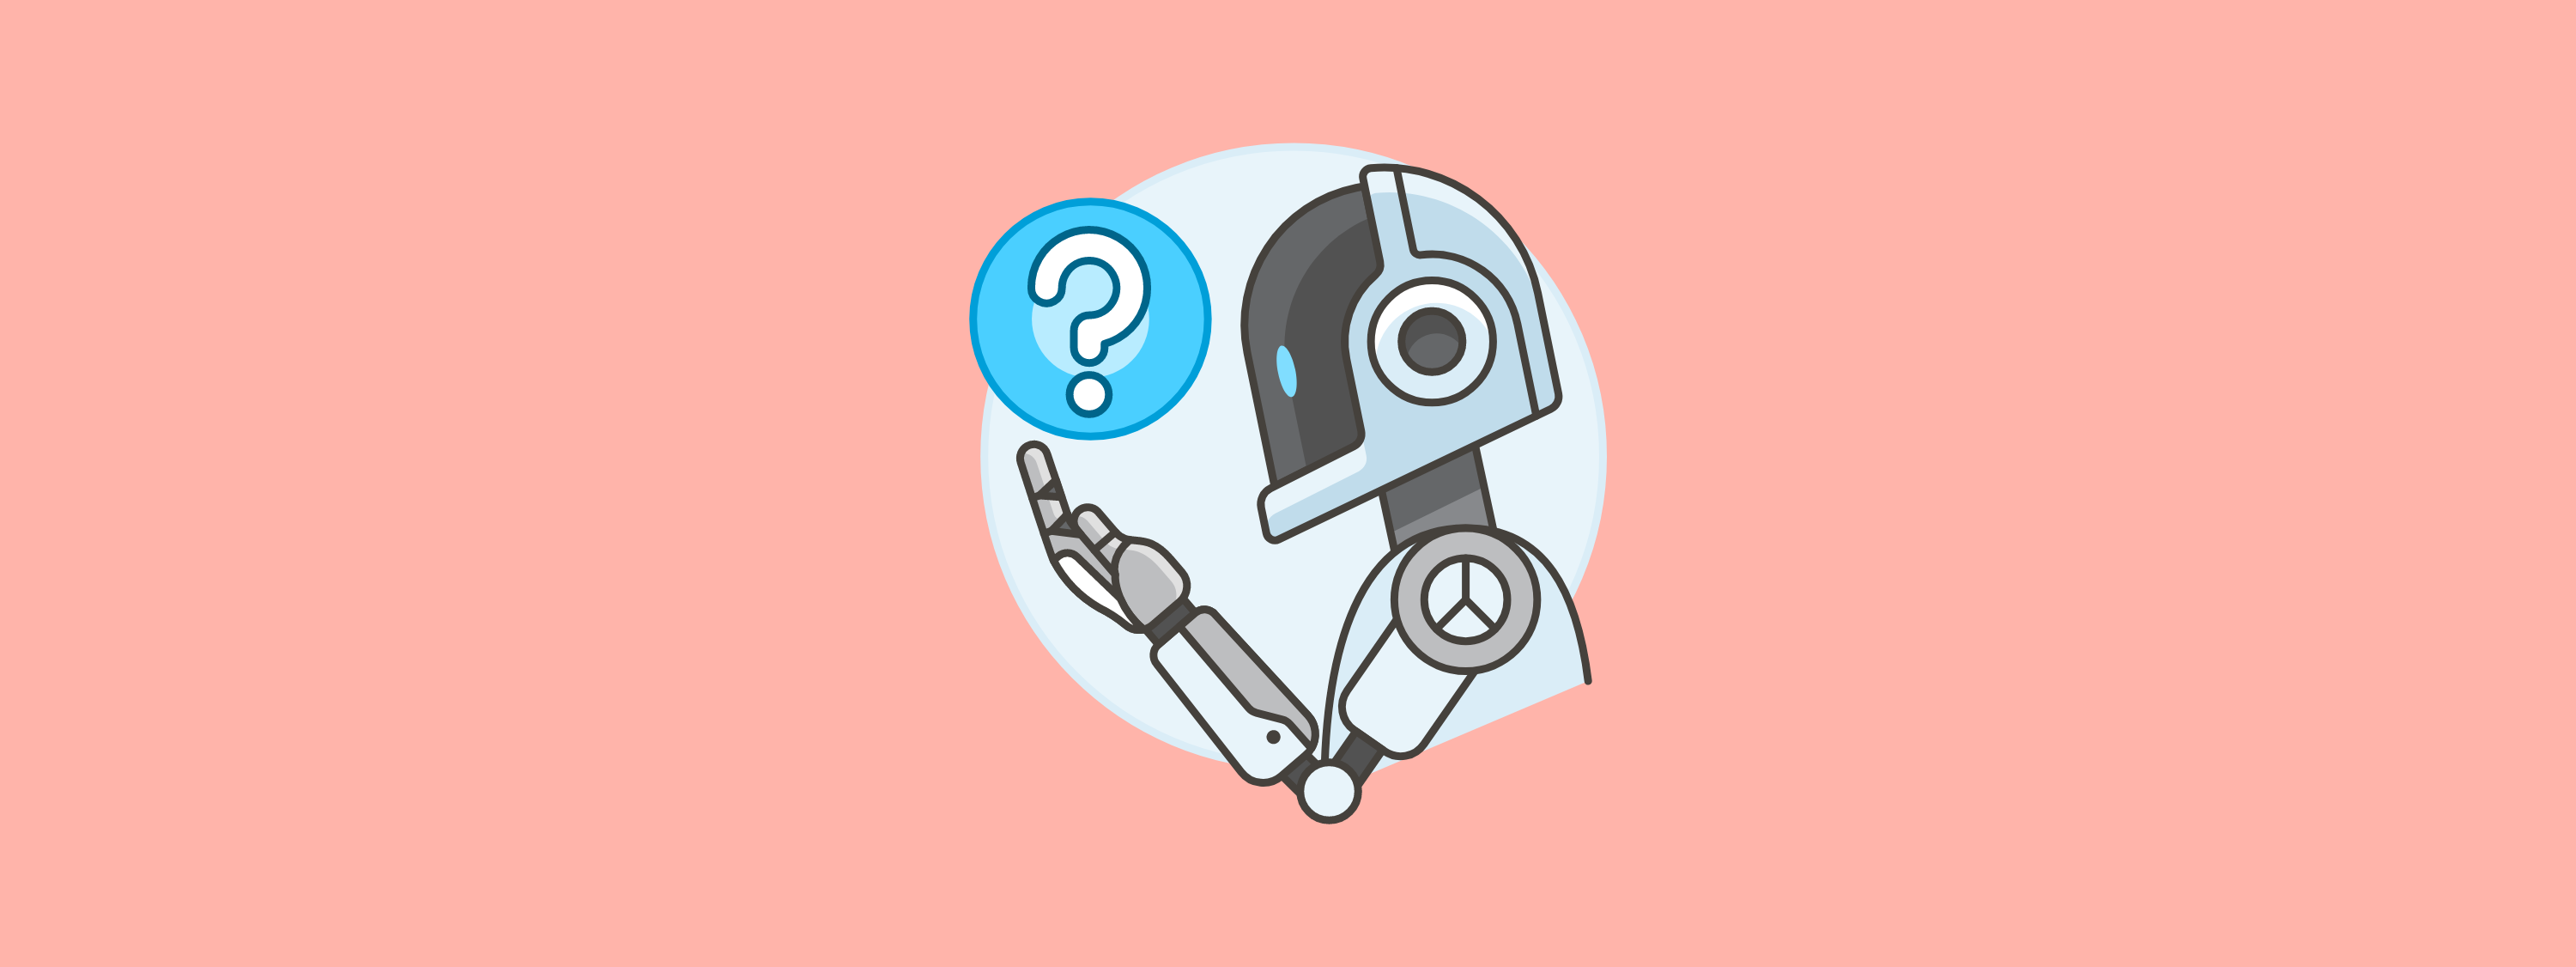 image of a robot holding a blue orb with a question mark on it